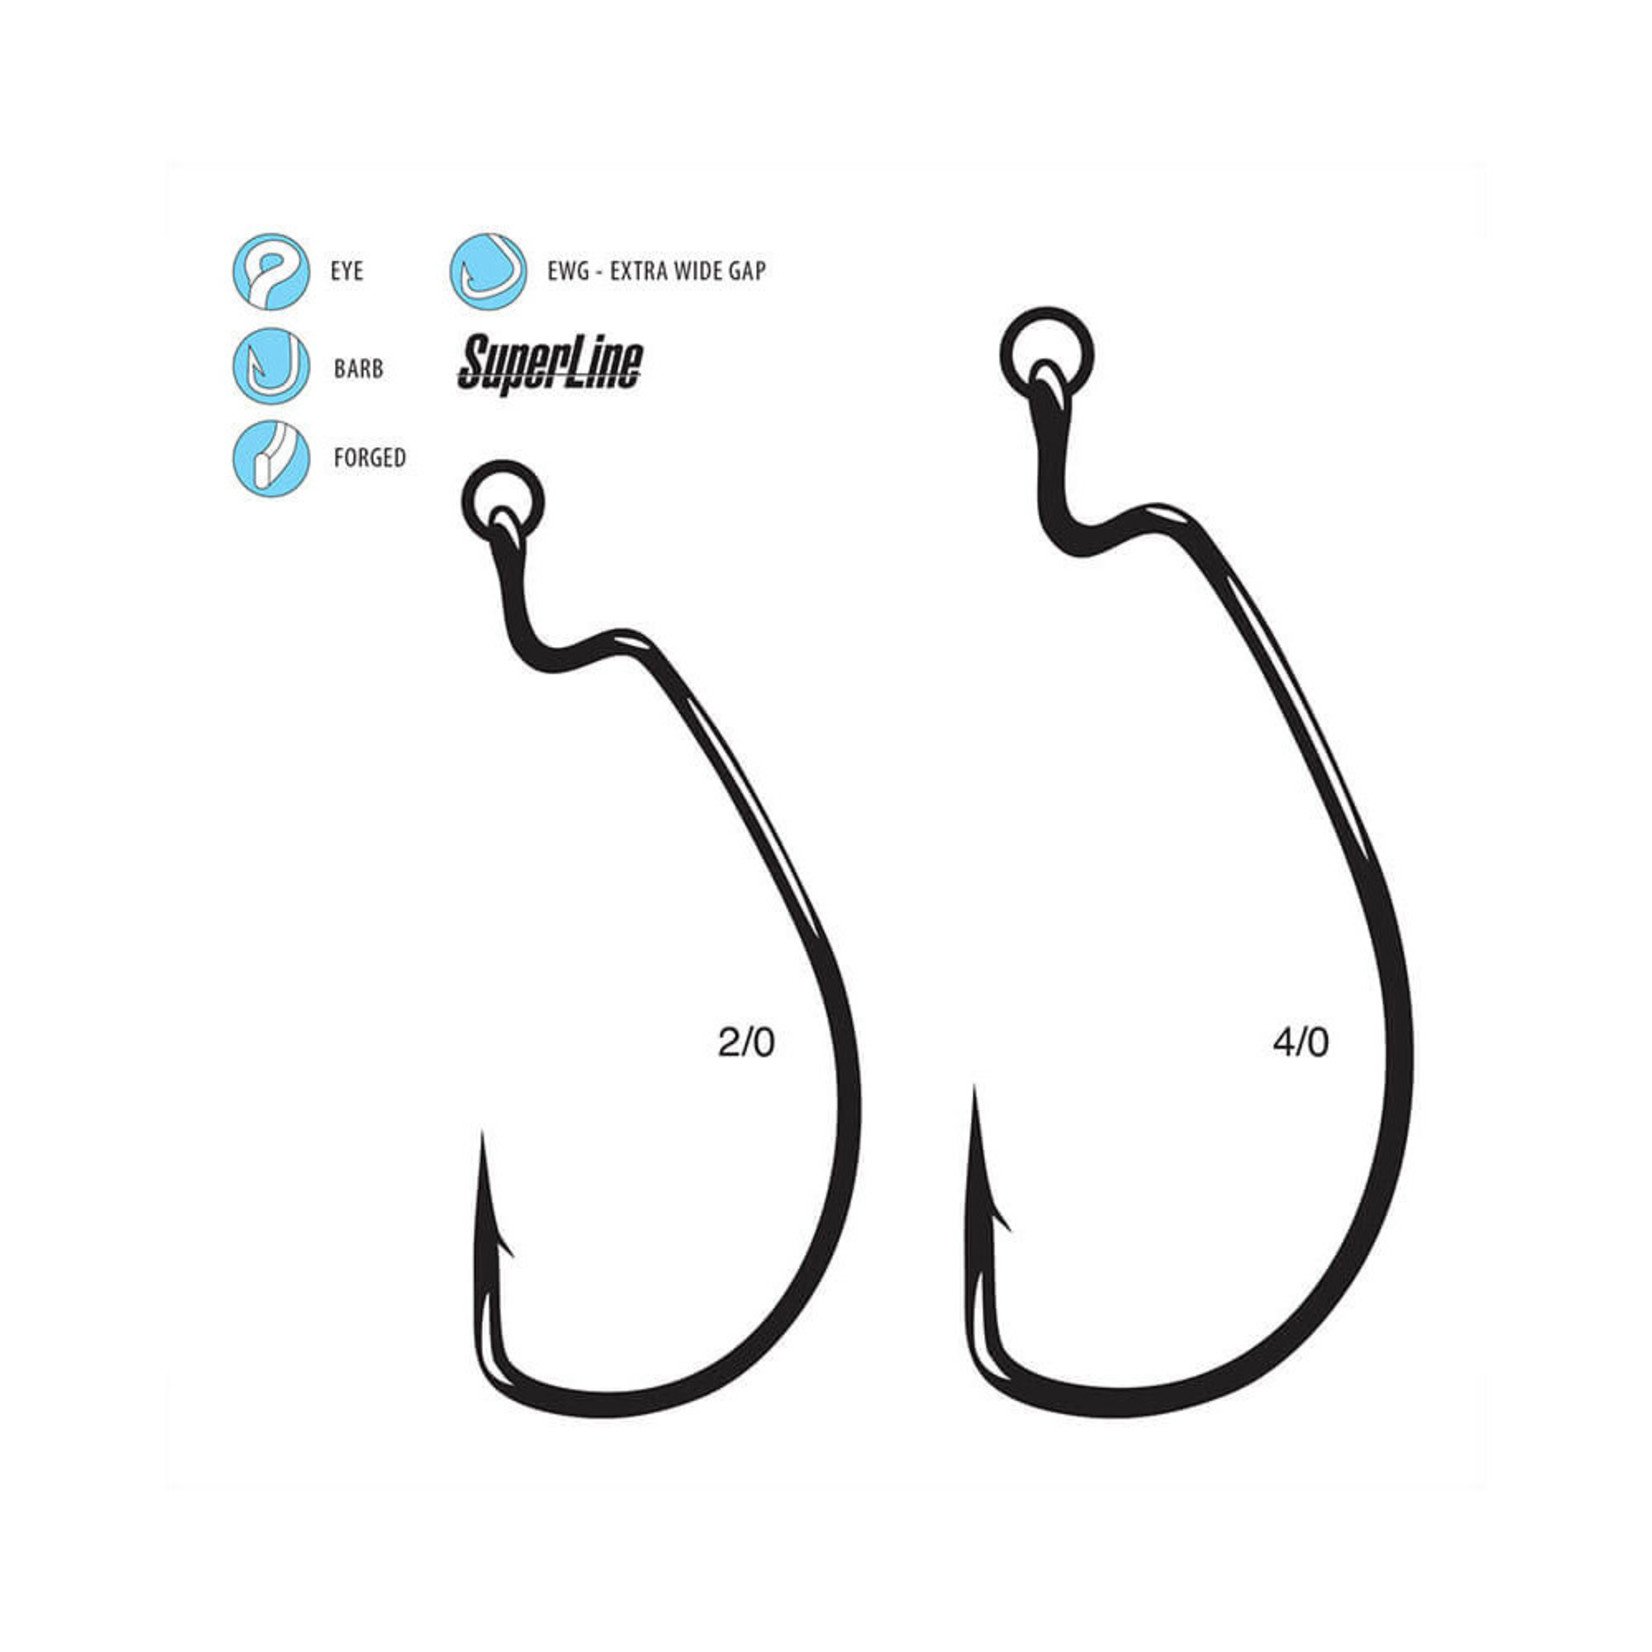 Superline EWG Worm Hook with Ring - Jake's Bait and Tackle